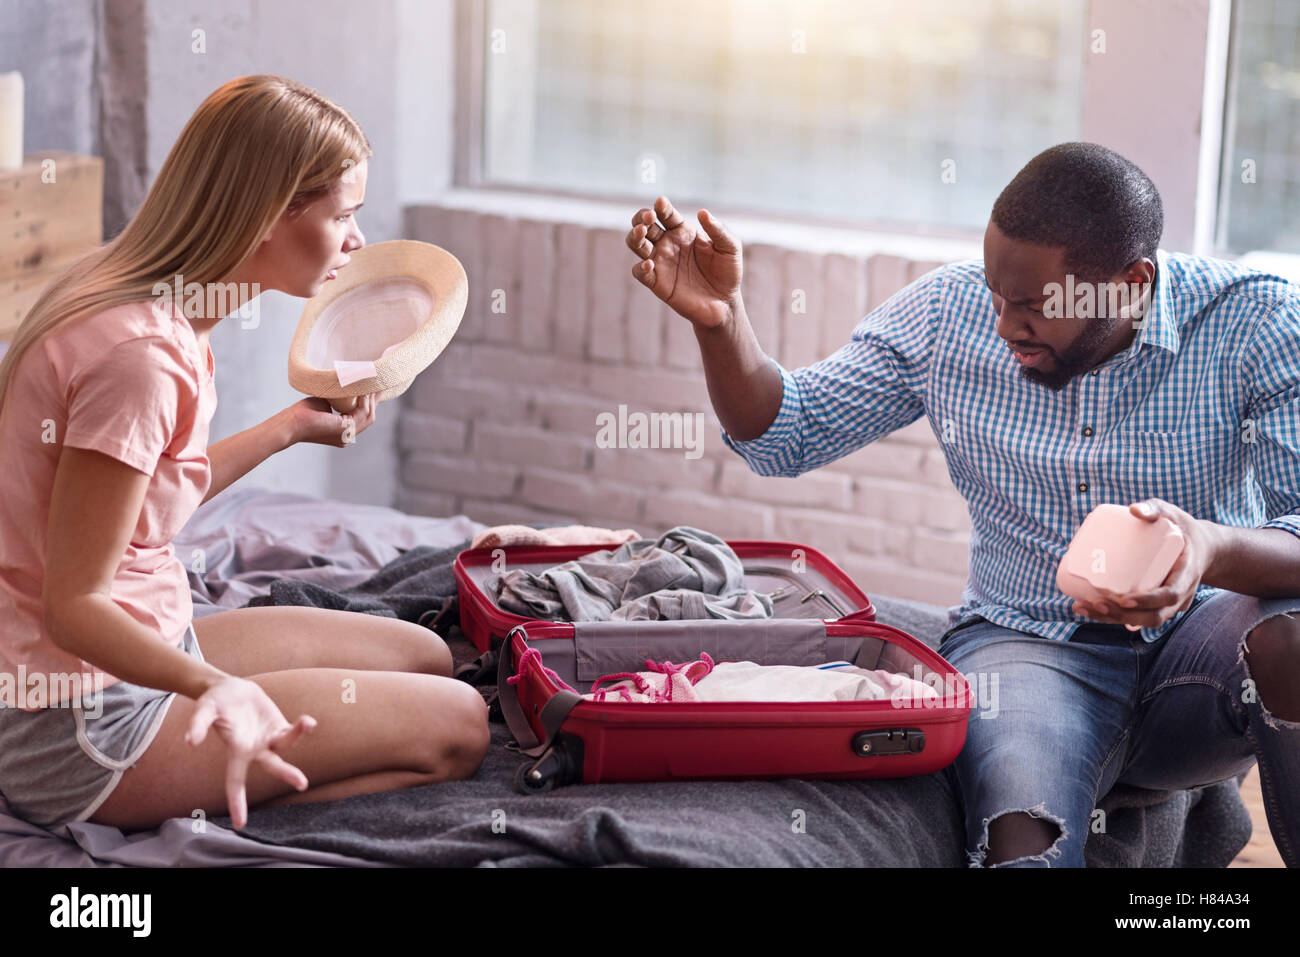 Young couple arguing and preparing for vacation Stock Photo